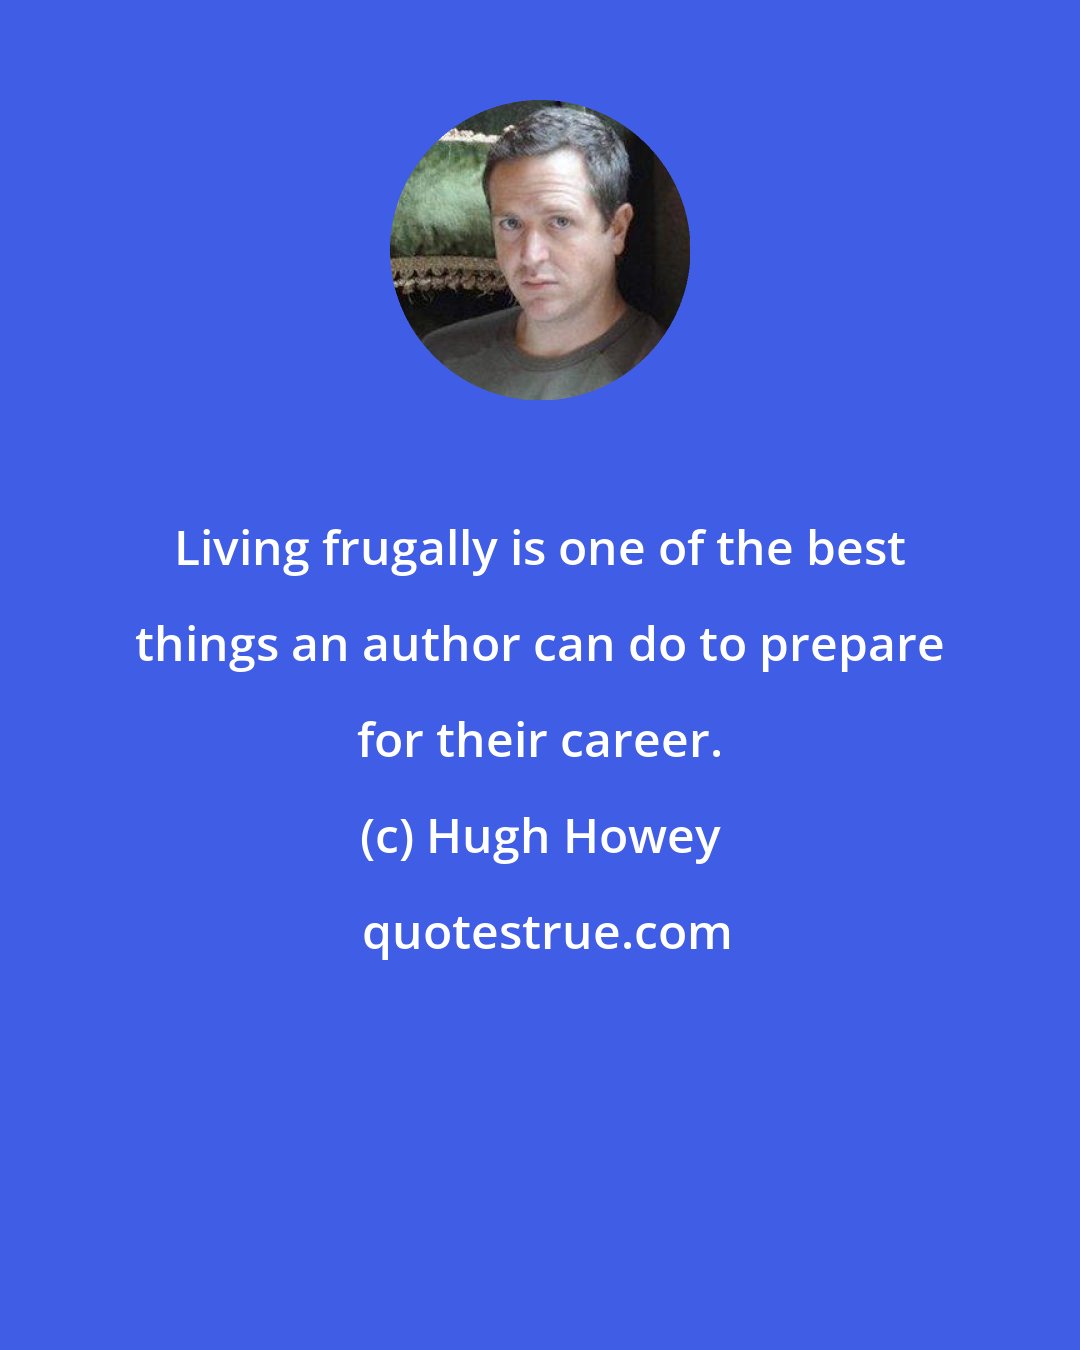 Hugh Howey: Living frugally is one of the best things an author can do to prepare for their career.